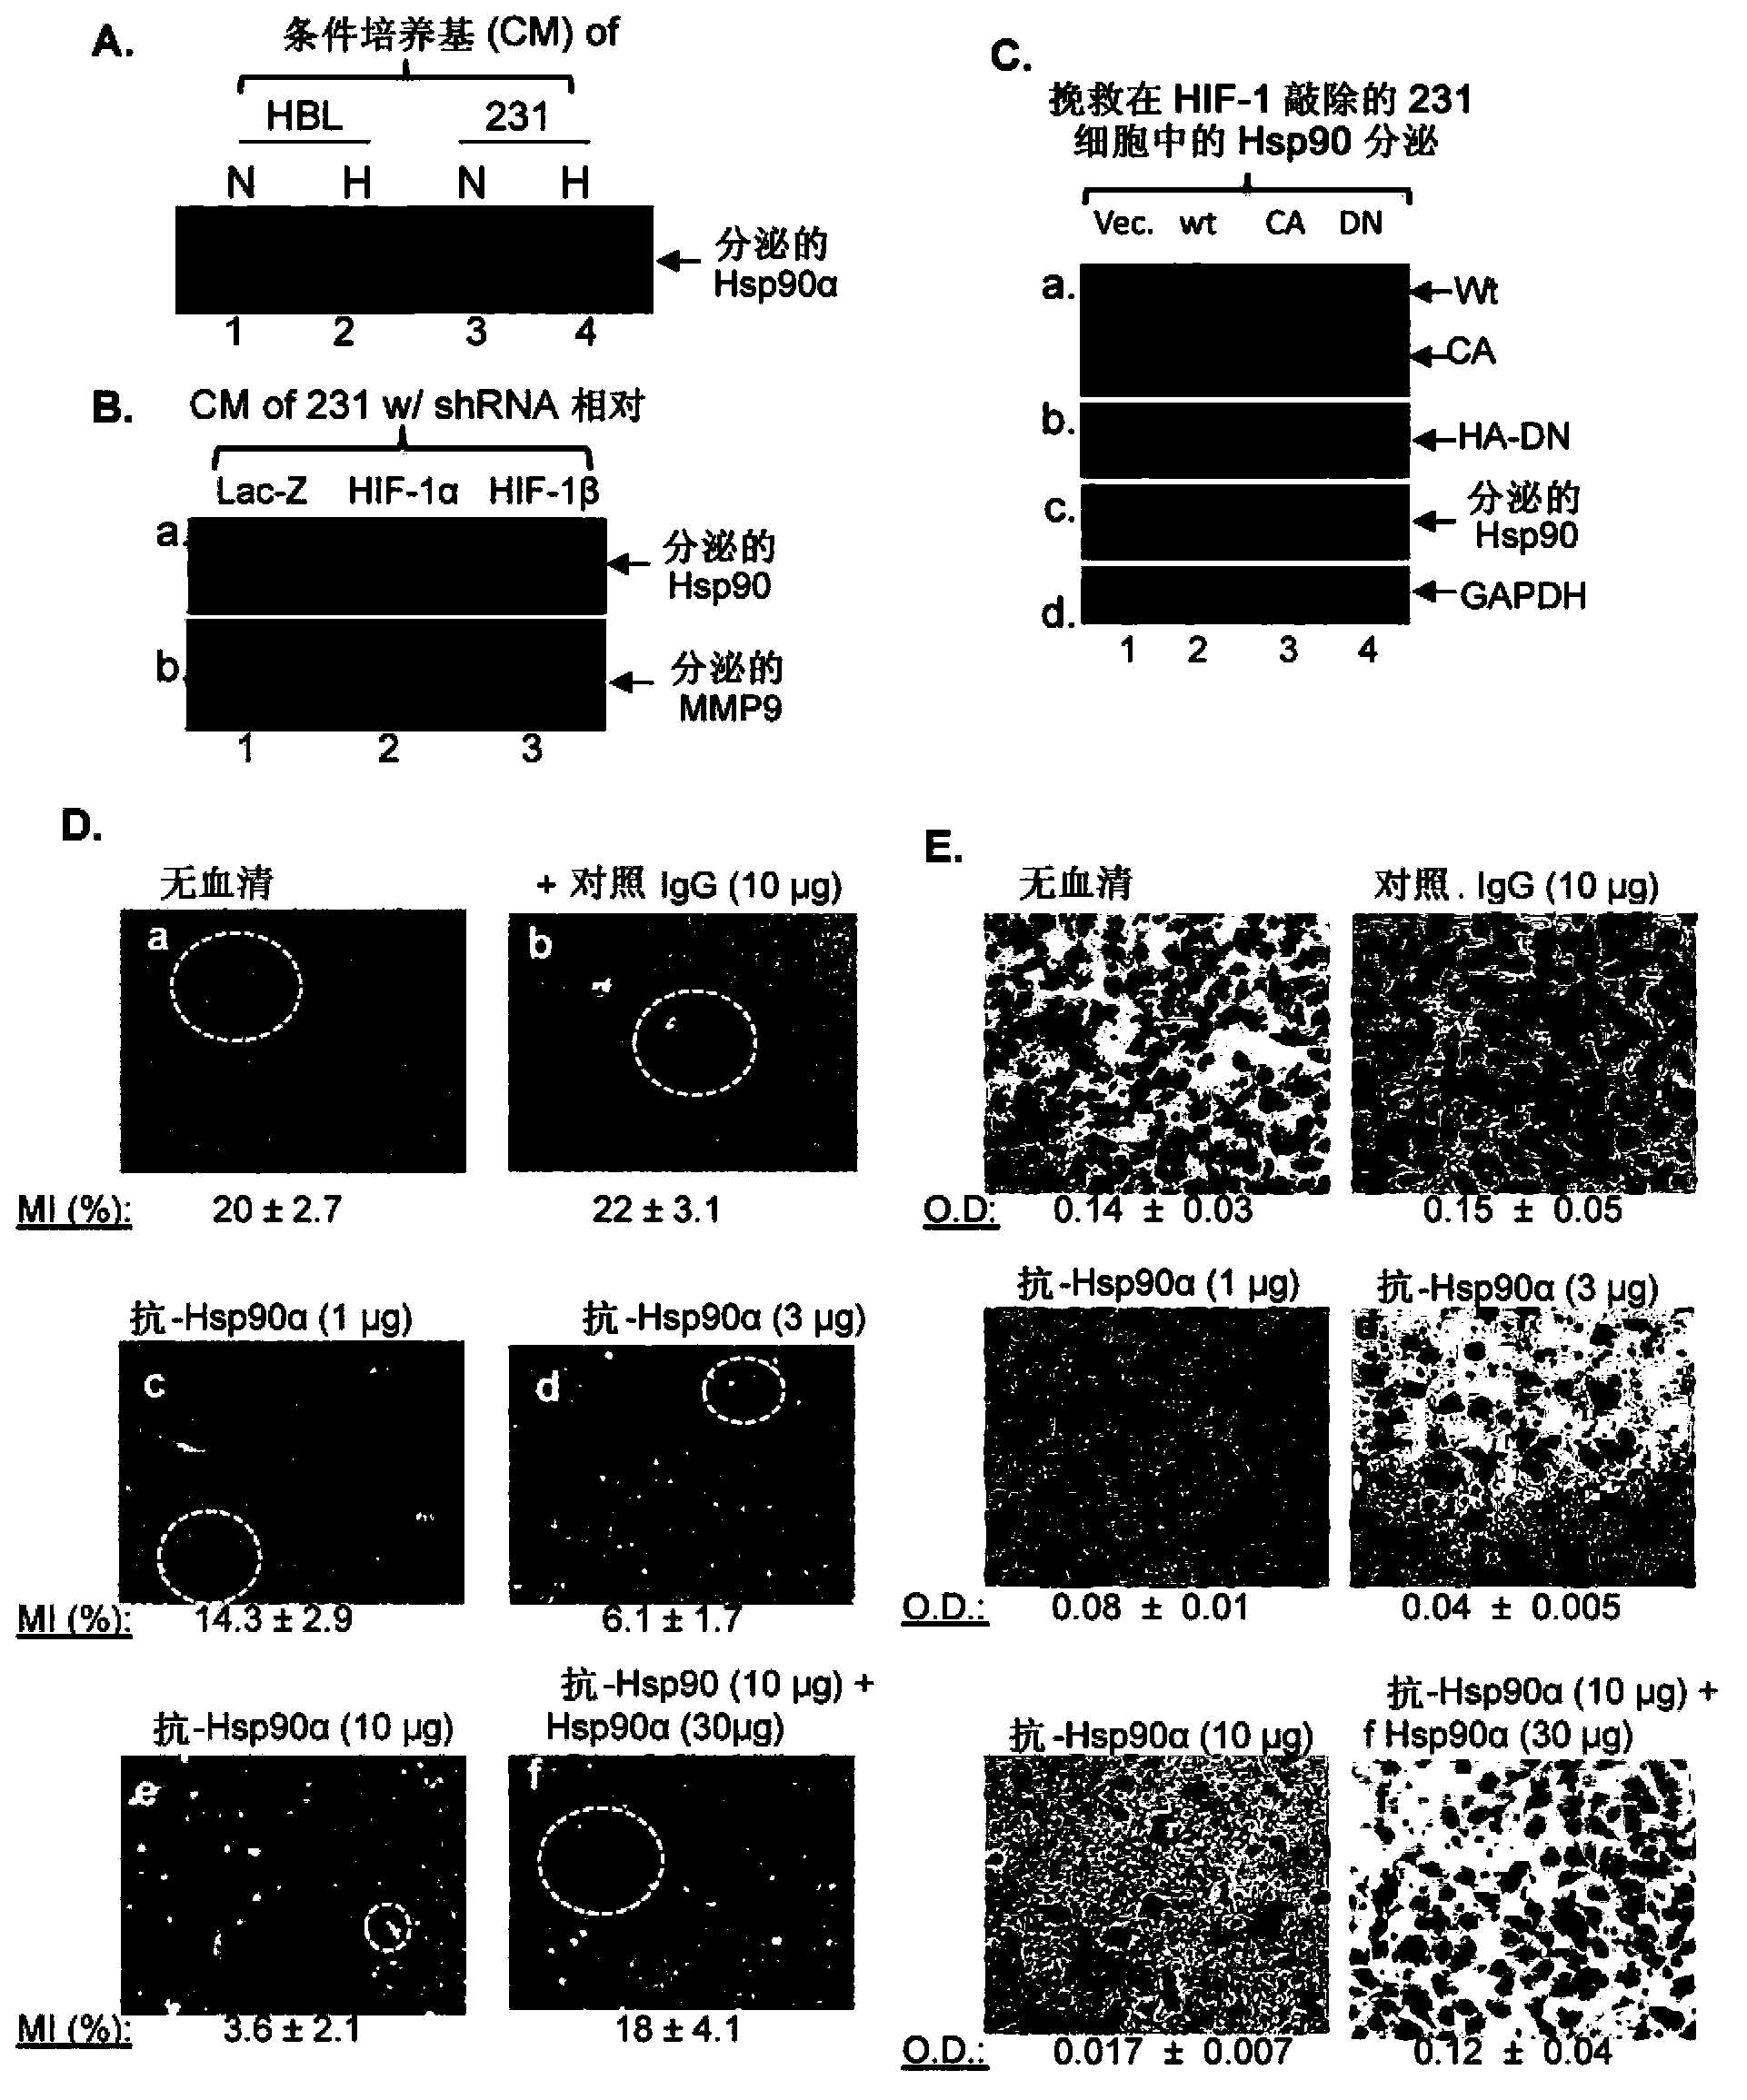 Fragment of secreted heat shock protein-90alpha (Hsp90alpha) as vaccines or epitope for monoclonal antibody drugs or target for small molecule drugs against a range of solid human tumors